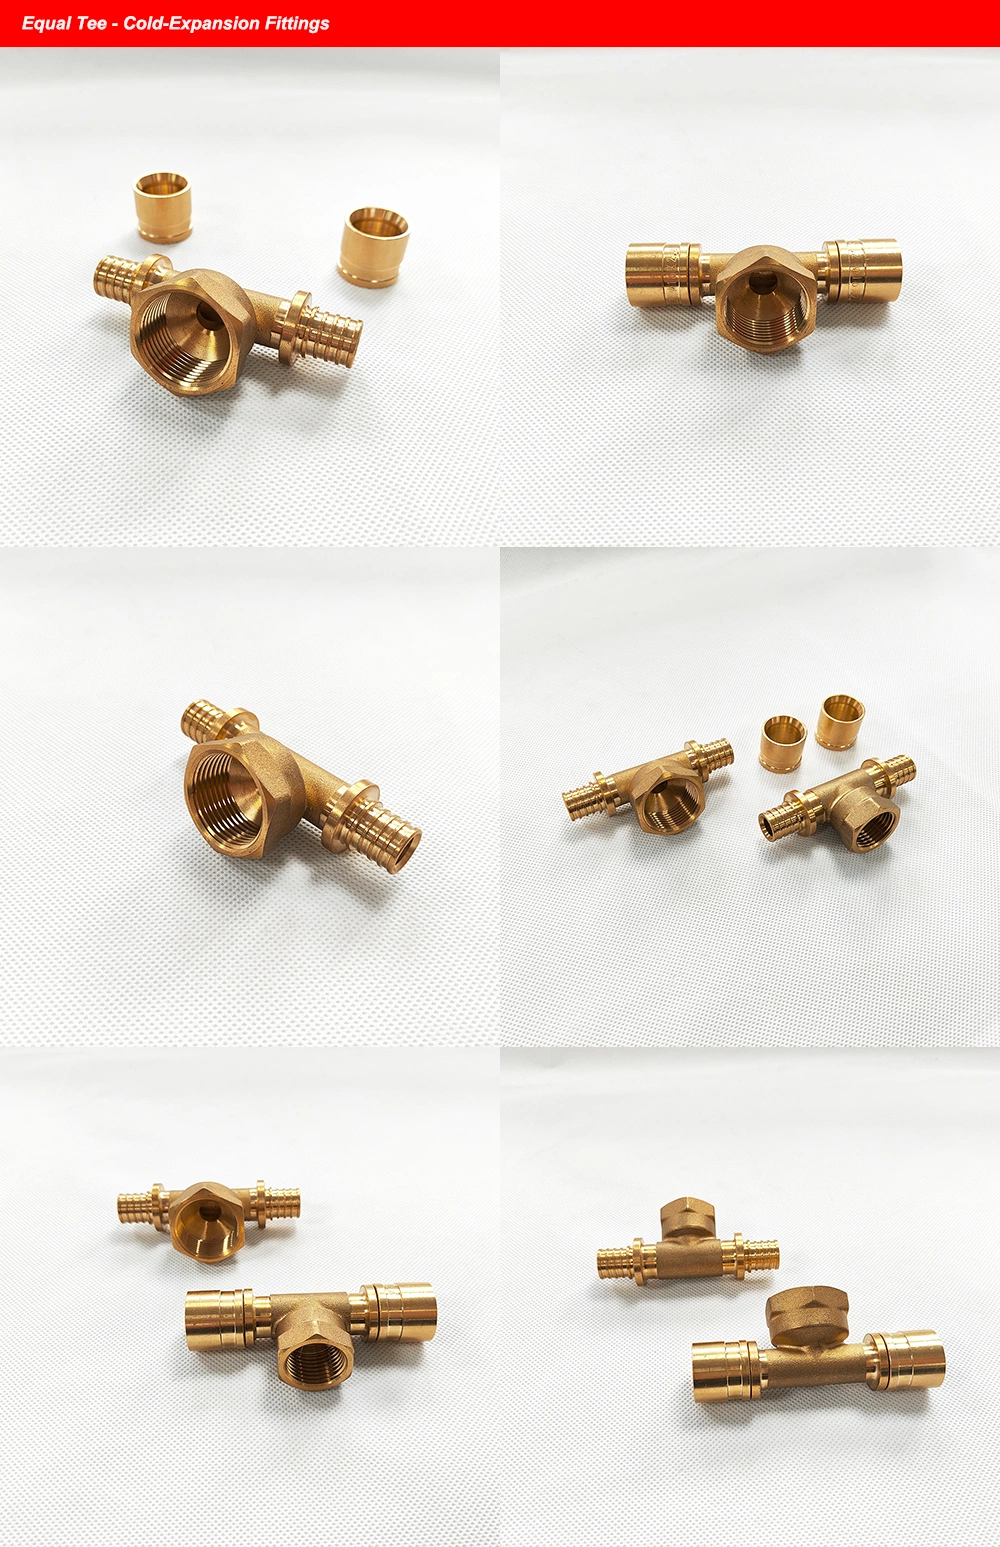 Brass Female Tee Sliding Fitting Cold-Expansion Fitting Use with Pex-a Pipe